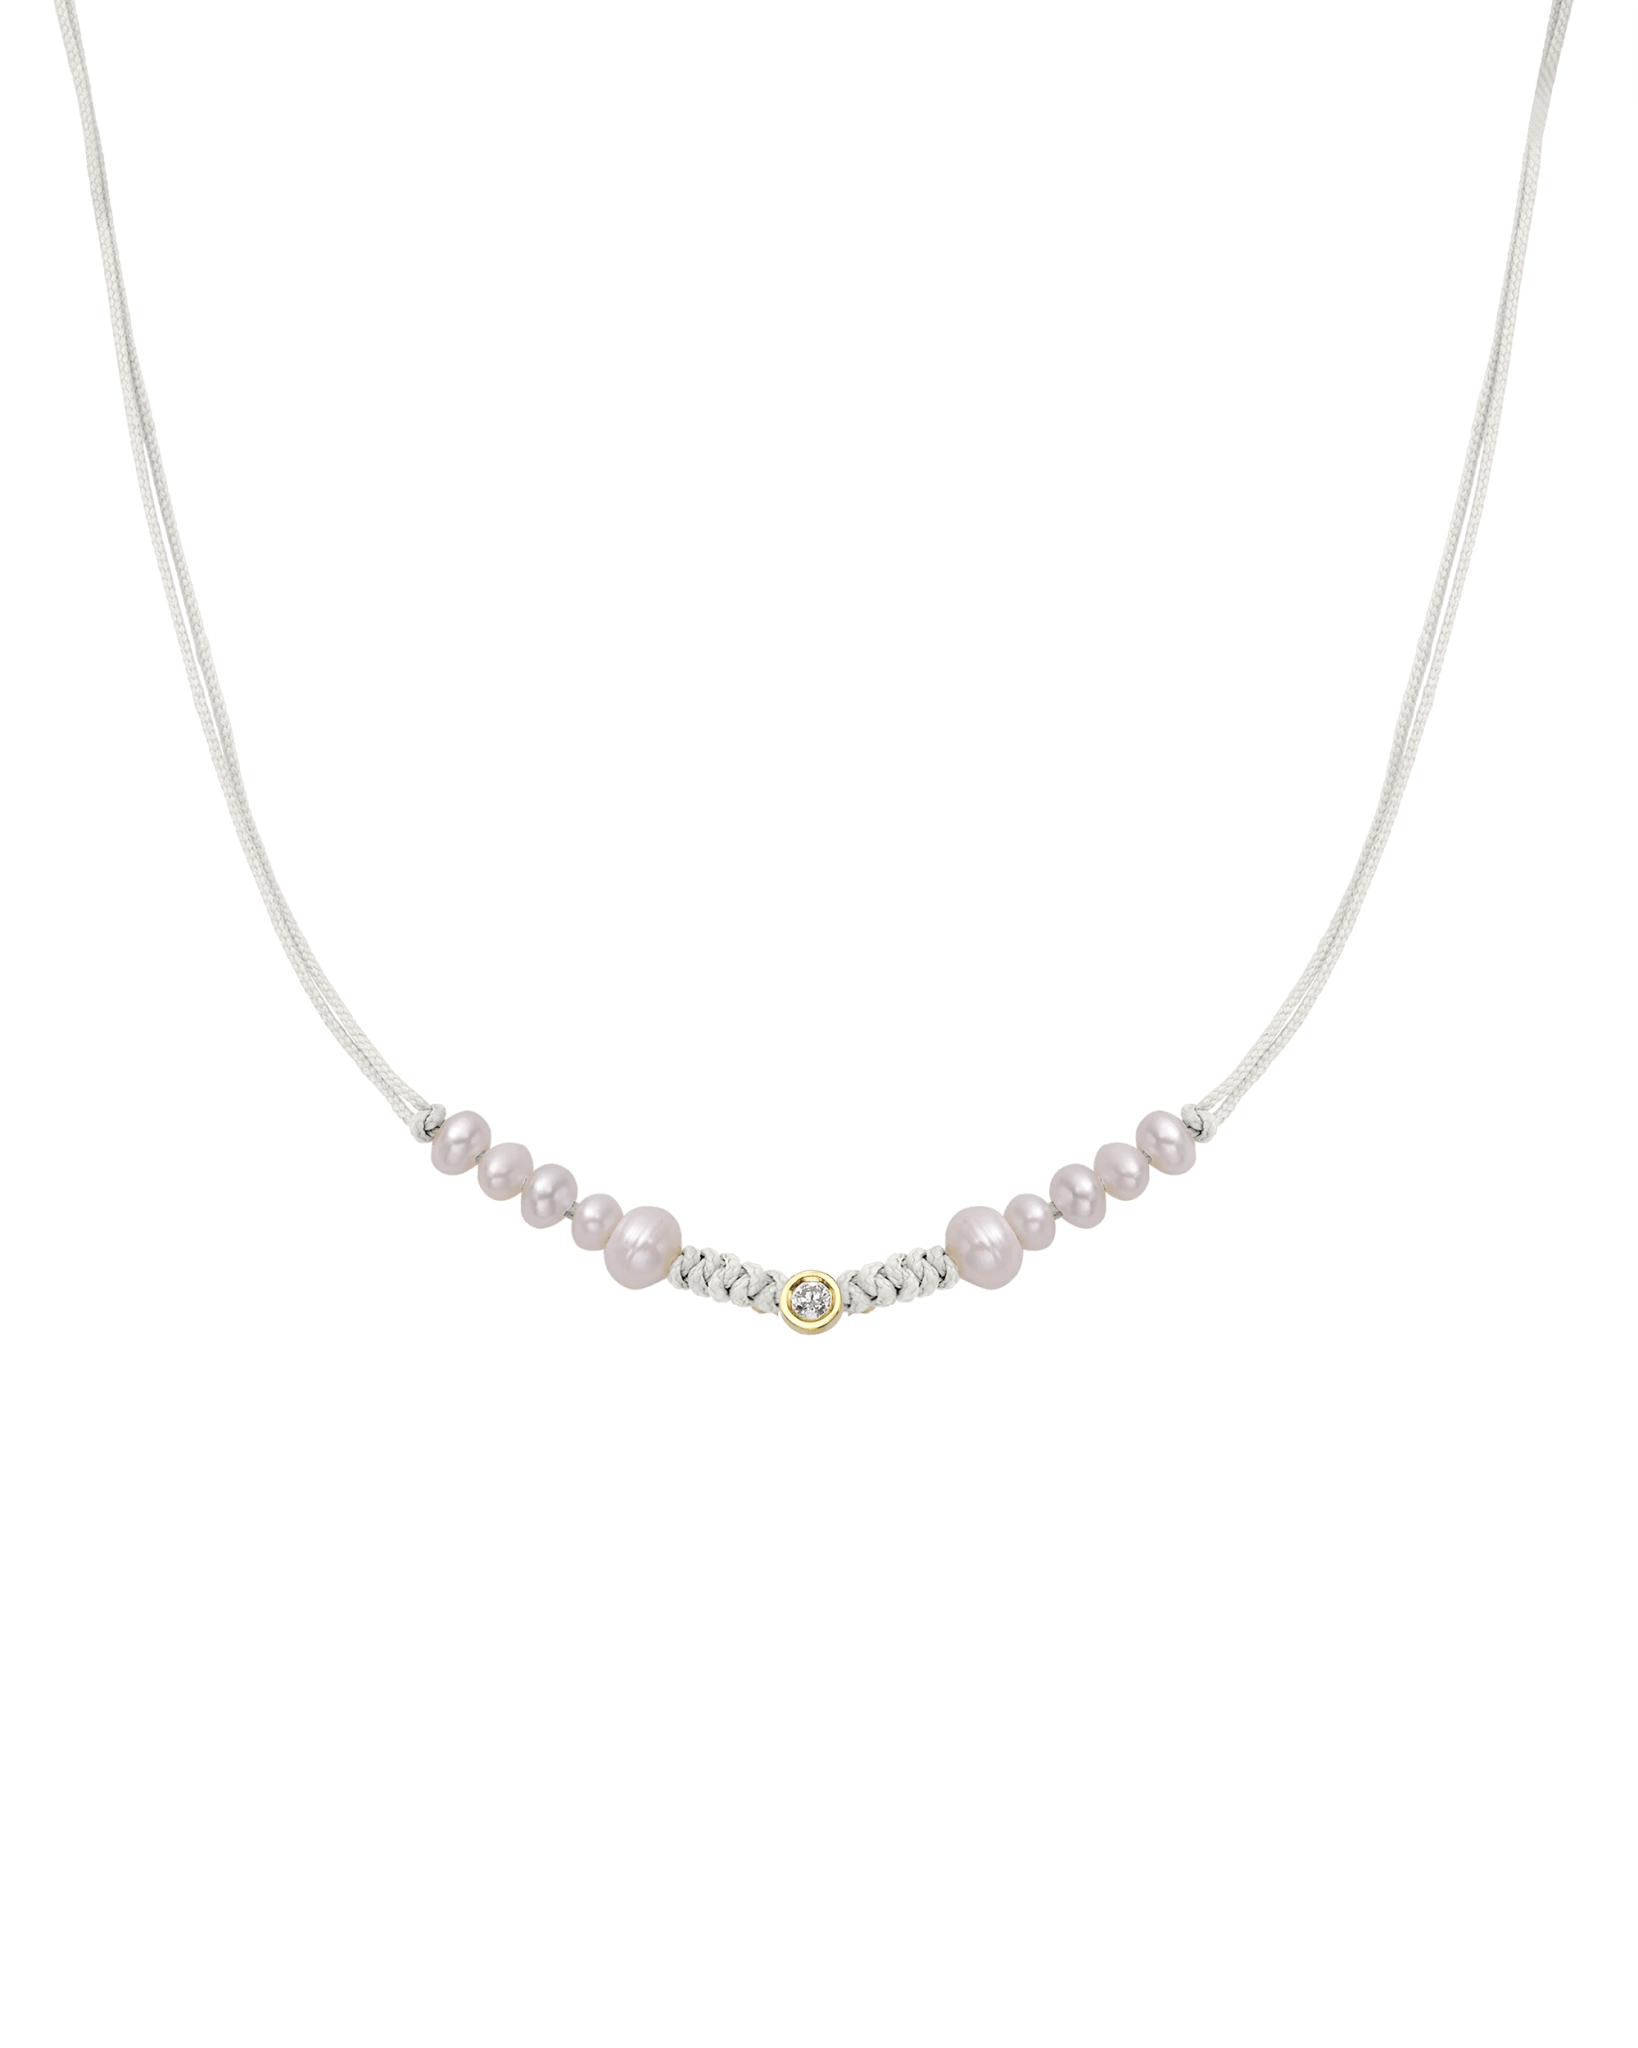 Ten Natural Pearl String of Love Necklace - 14K Yellow Gold Necklaces 14K Solid Gold Pearl Medium: 0.04ct 